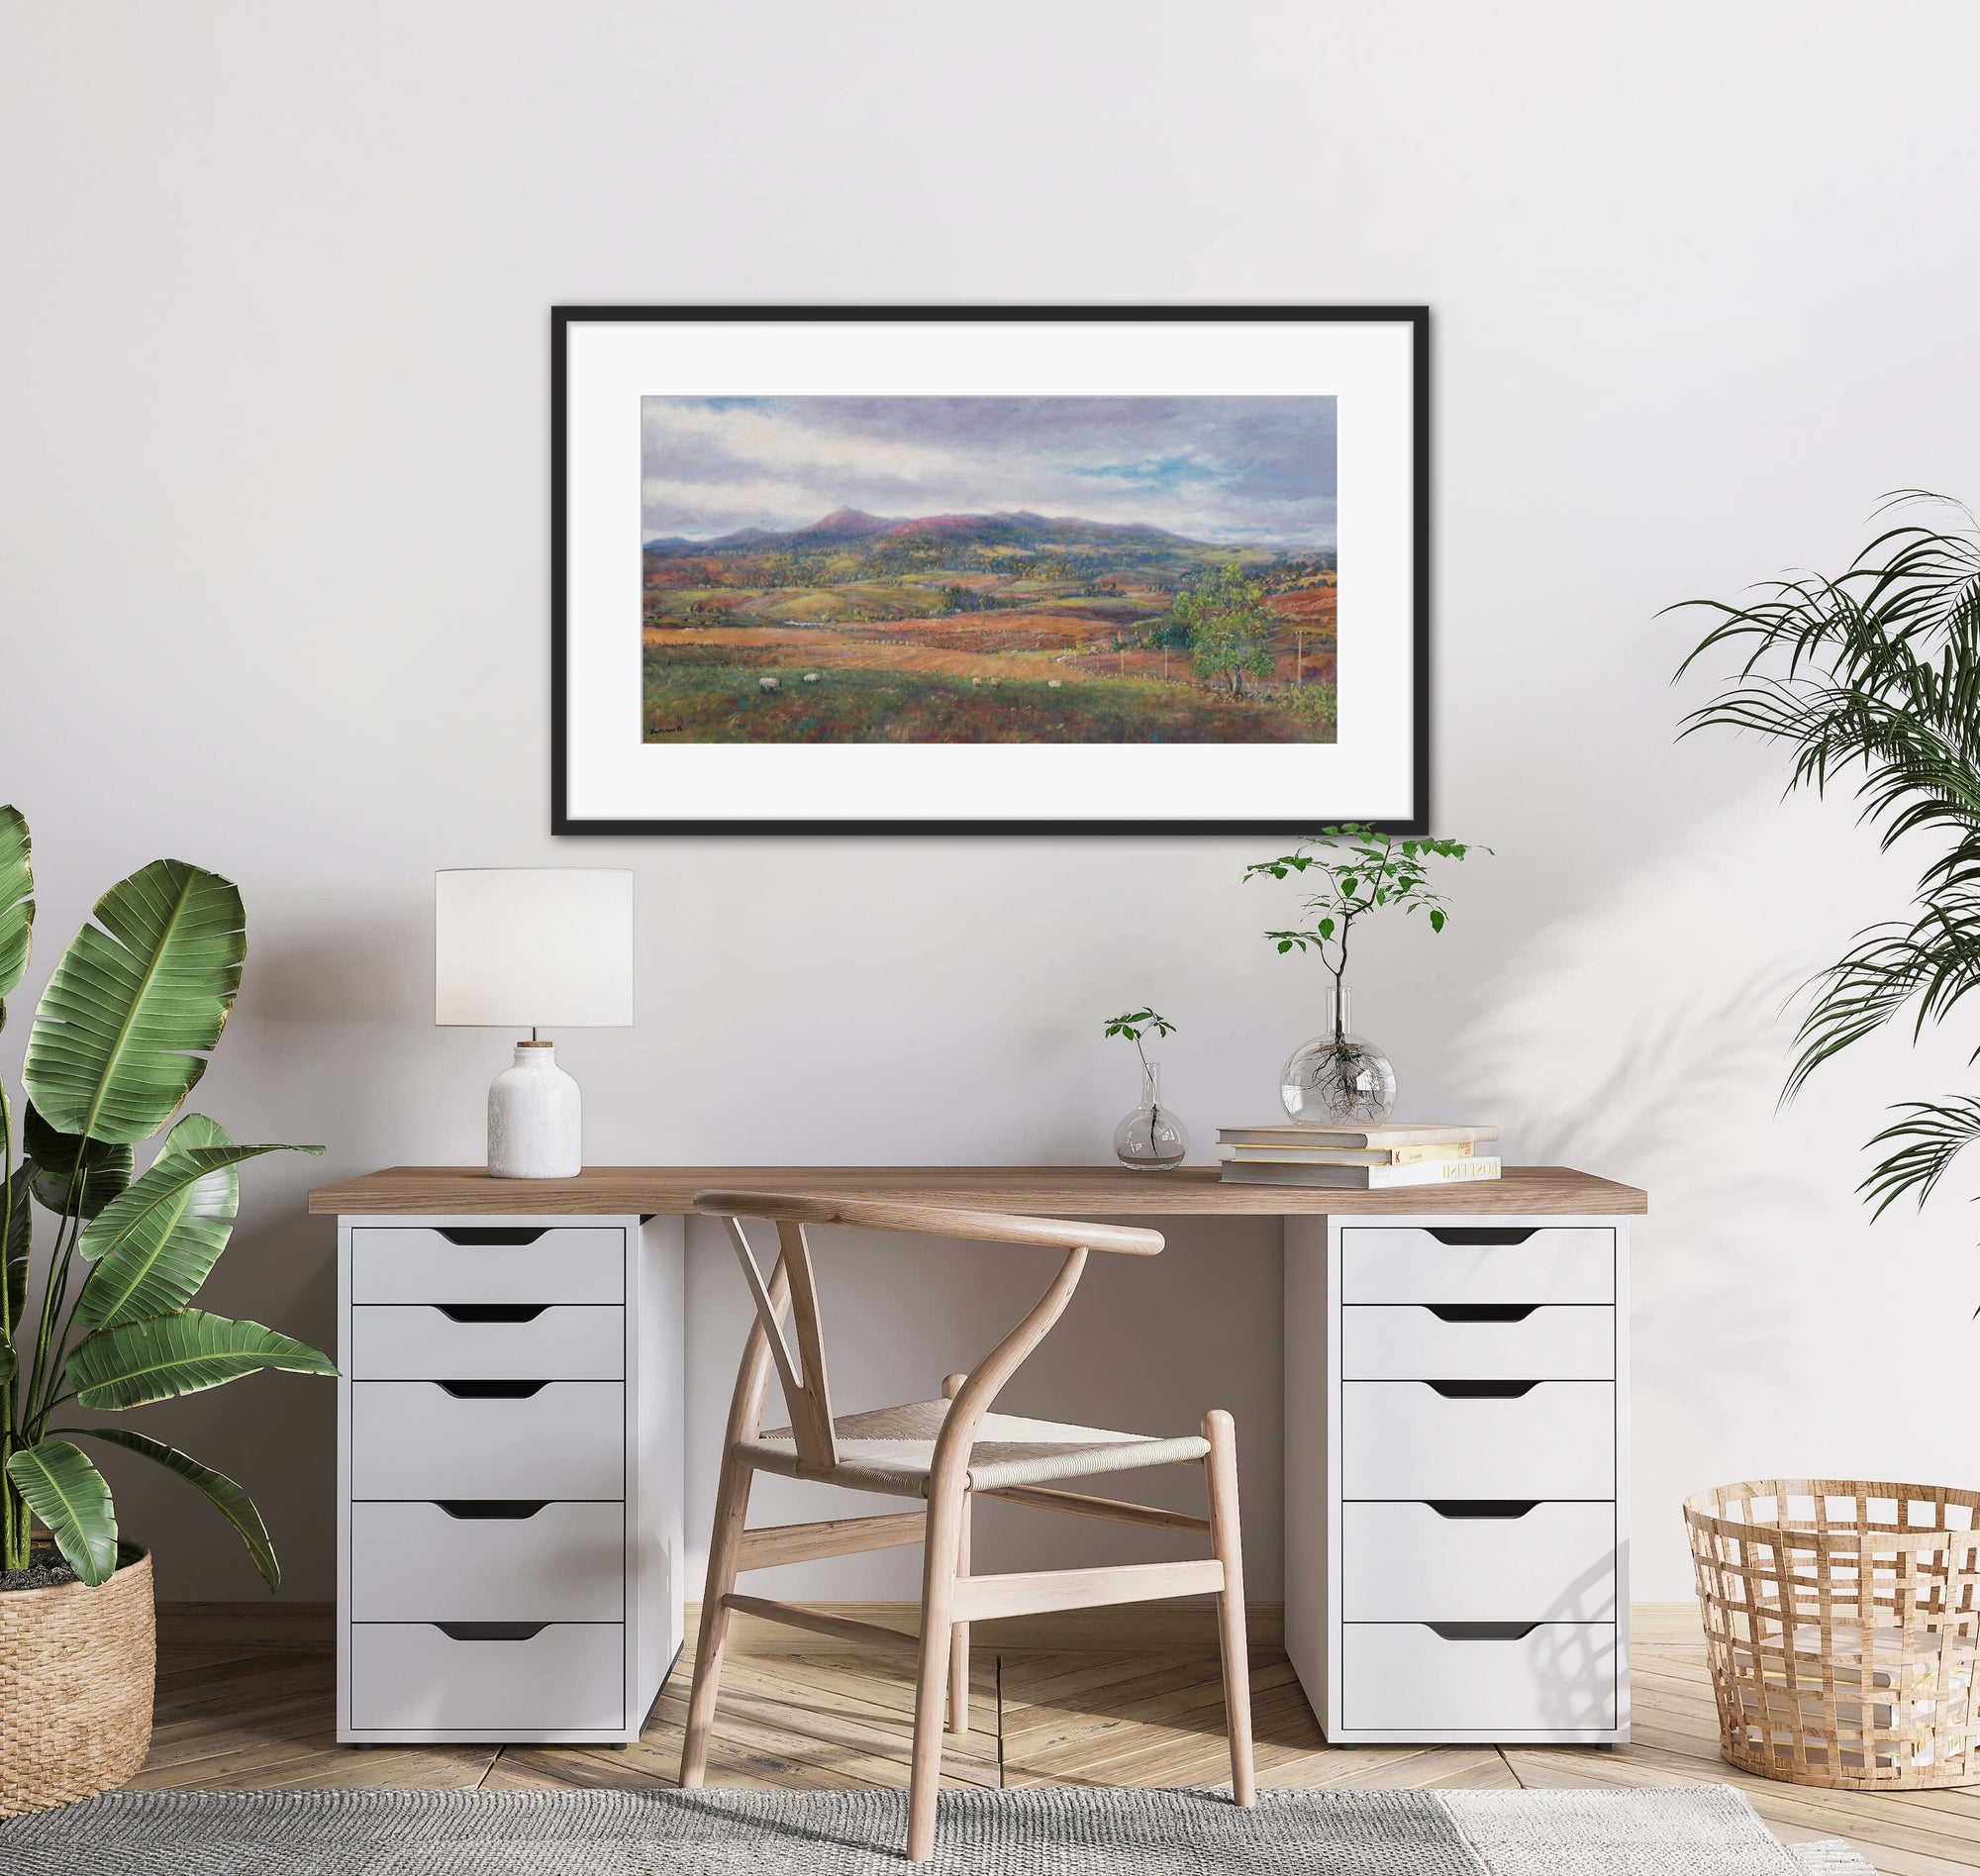 'Over the fields and far away' - Fine Art Print of Bennachie